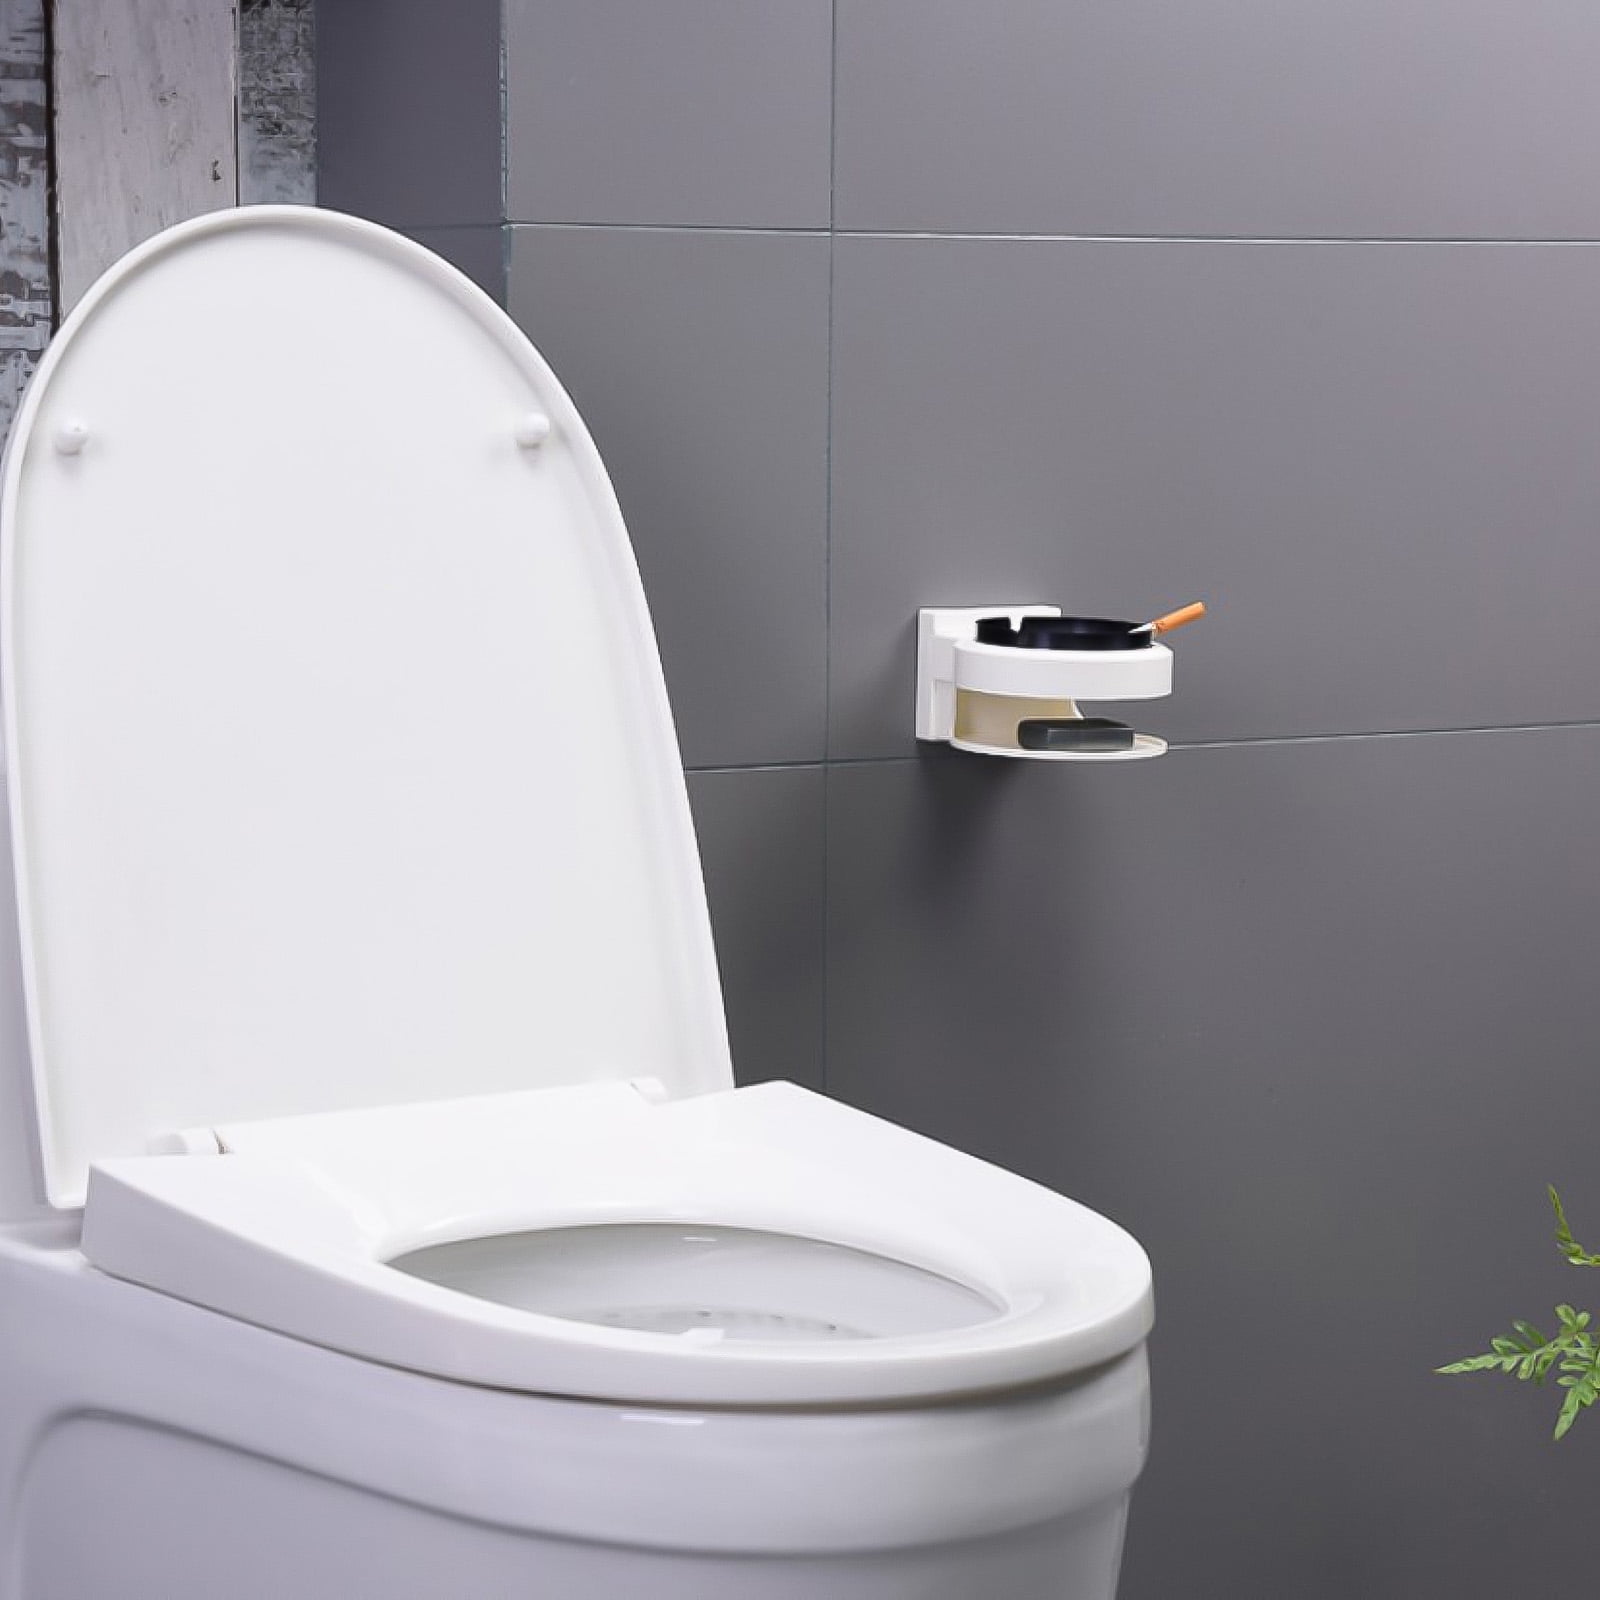 Hesroicy Wall Ashtray Wall-mounted Punch-free Removable Whale Tail Shape  Waterproof Keep Clean Stainless Steel Detachable Bathroom Ashtray Household  Stuff 